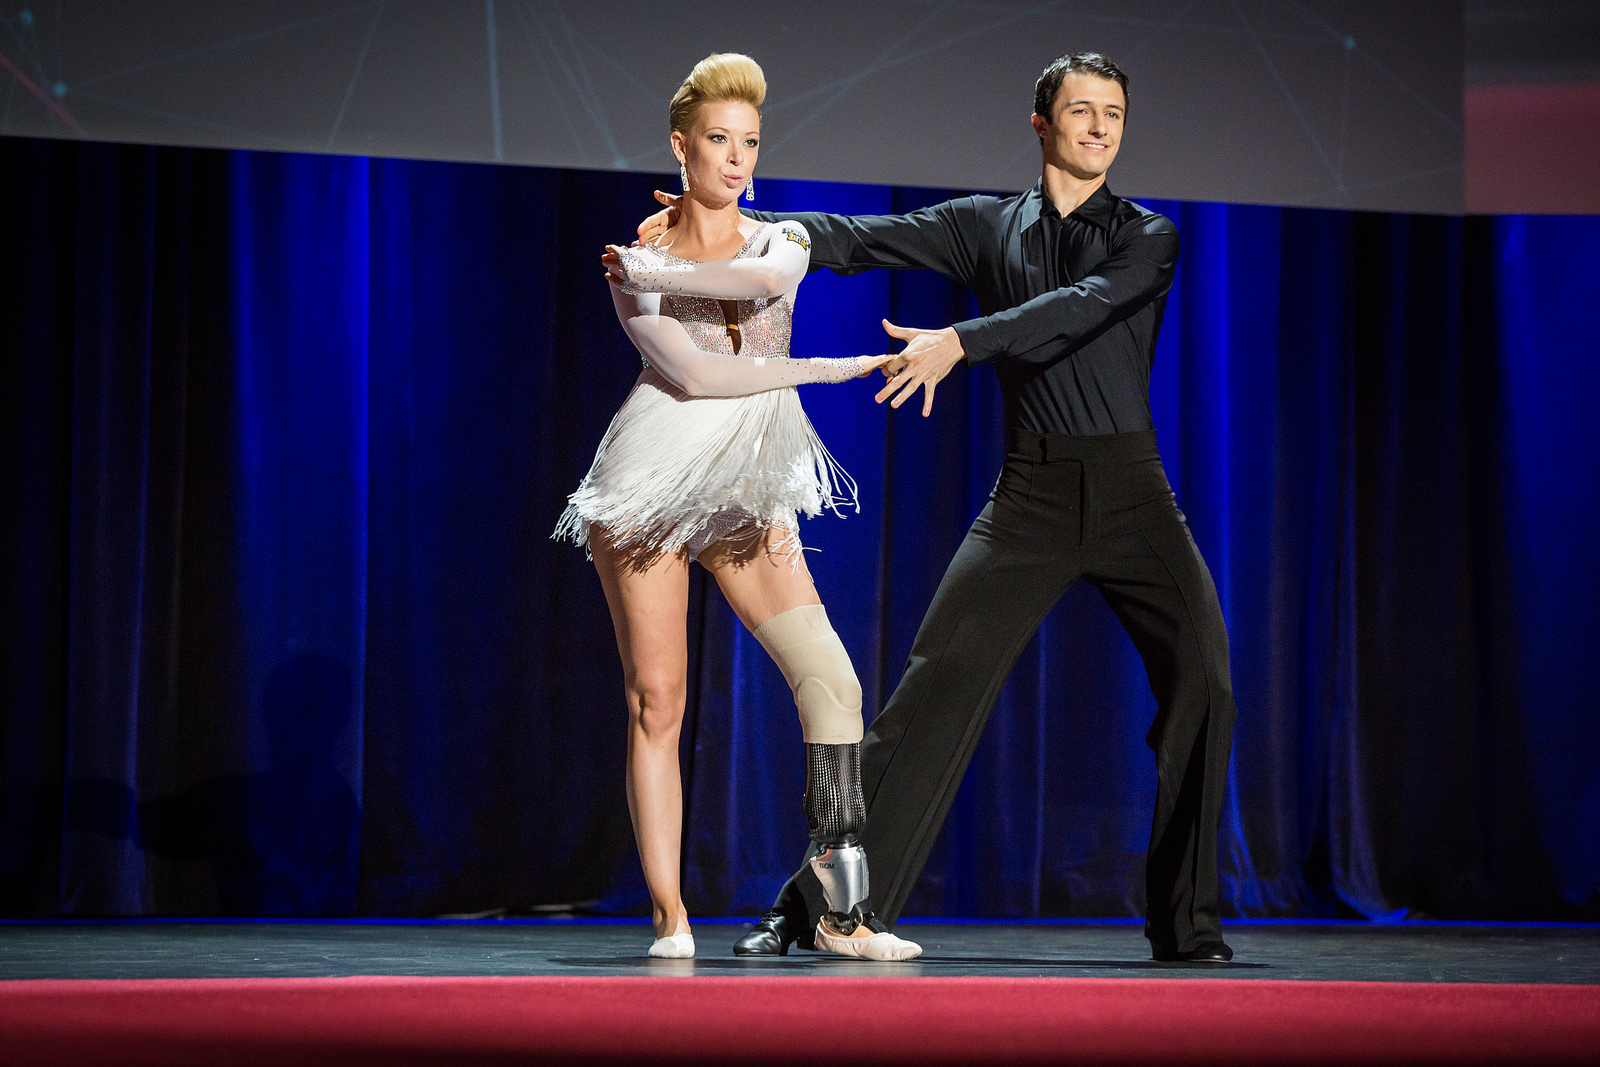 Dancer Adrianne Haslet-Davis lost her left leg in the Boston Marathon bombing. Today, she danced for the first time since thanks to an ultra high-tech prosthetic created by Hugh Herr's lab at MIT. Photo: James Duncan Davidson